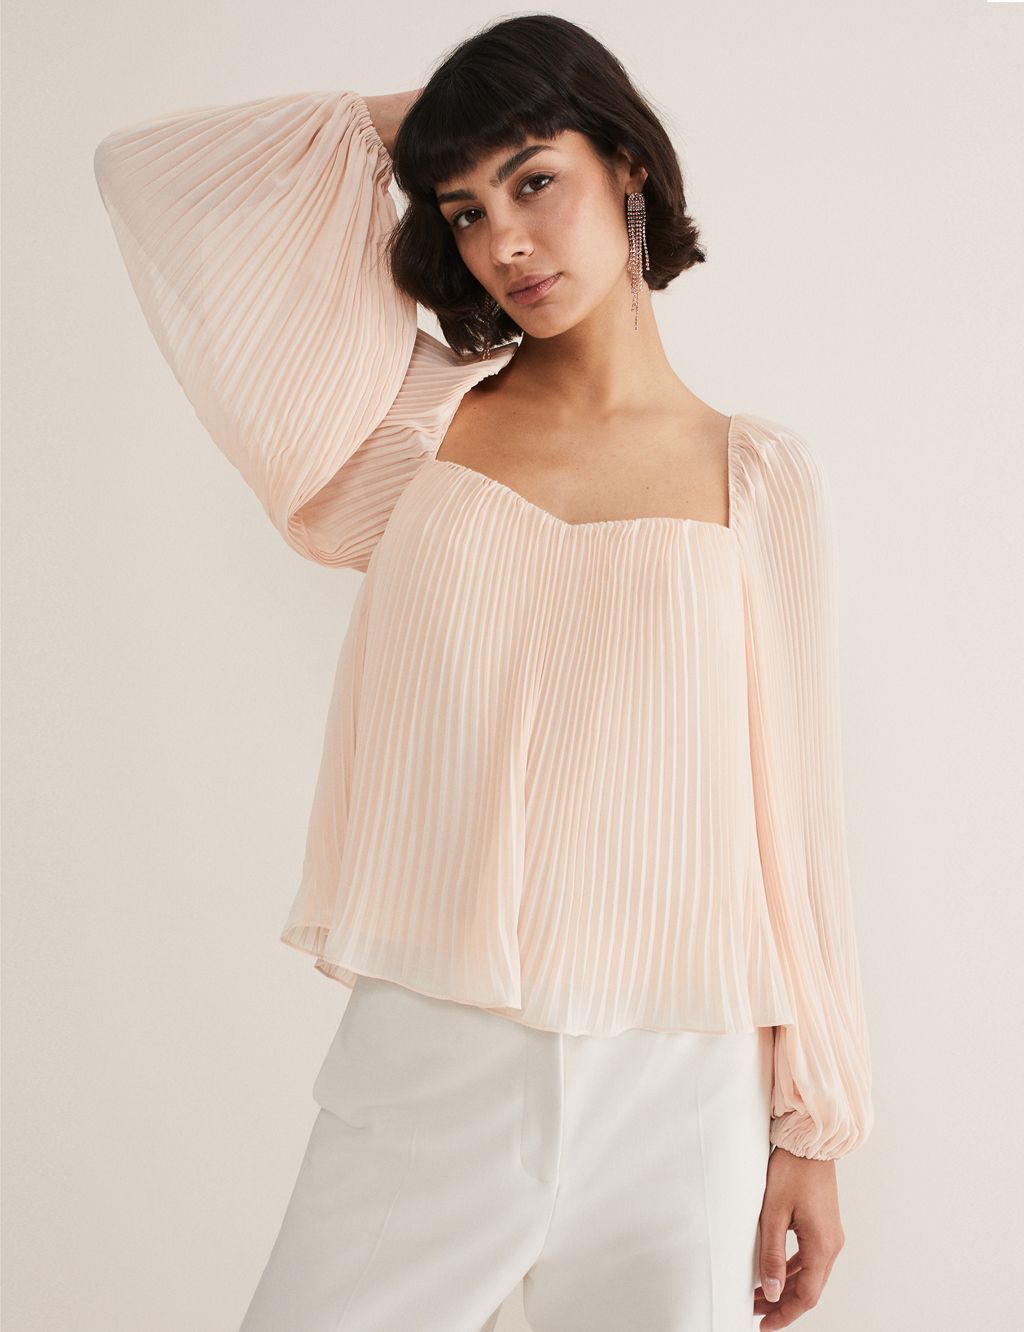 Pleated Square Neck Top image 1